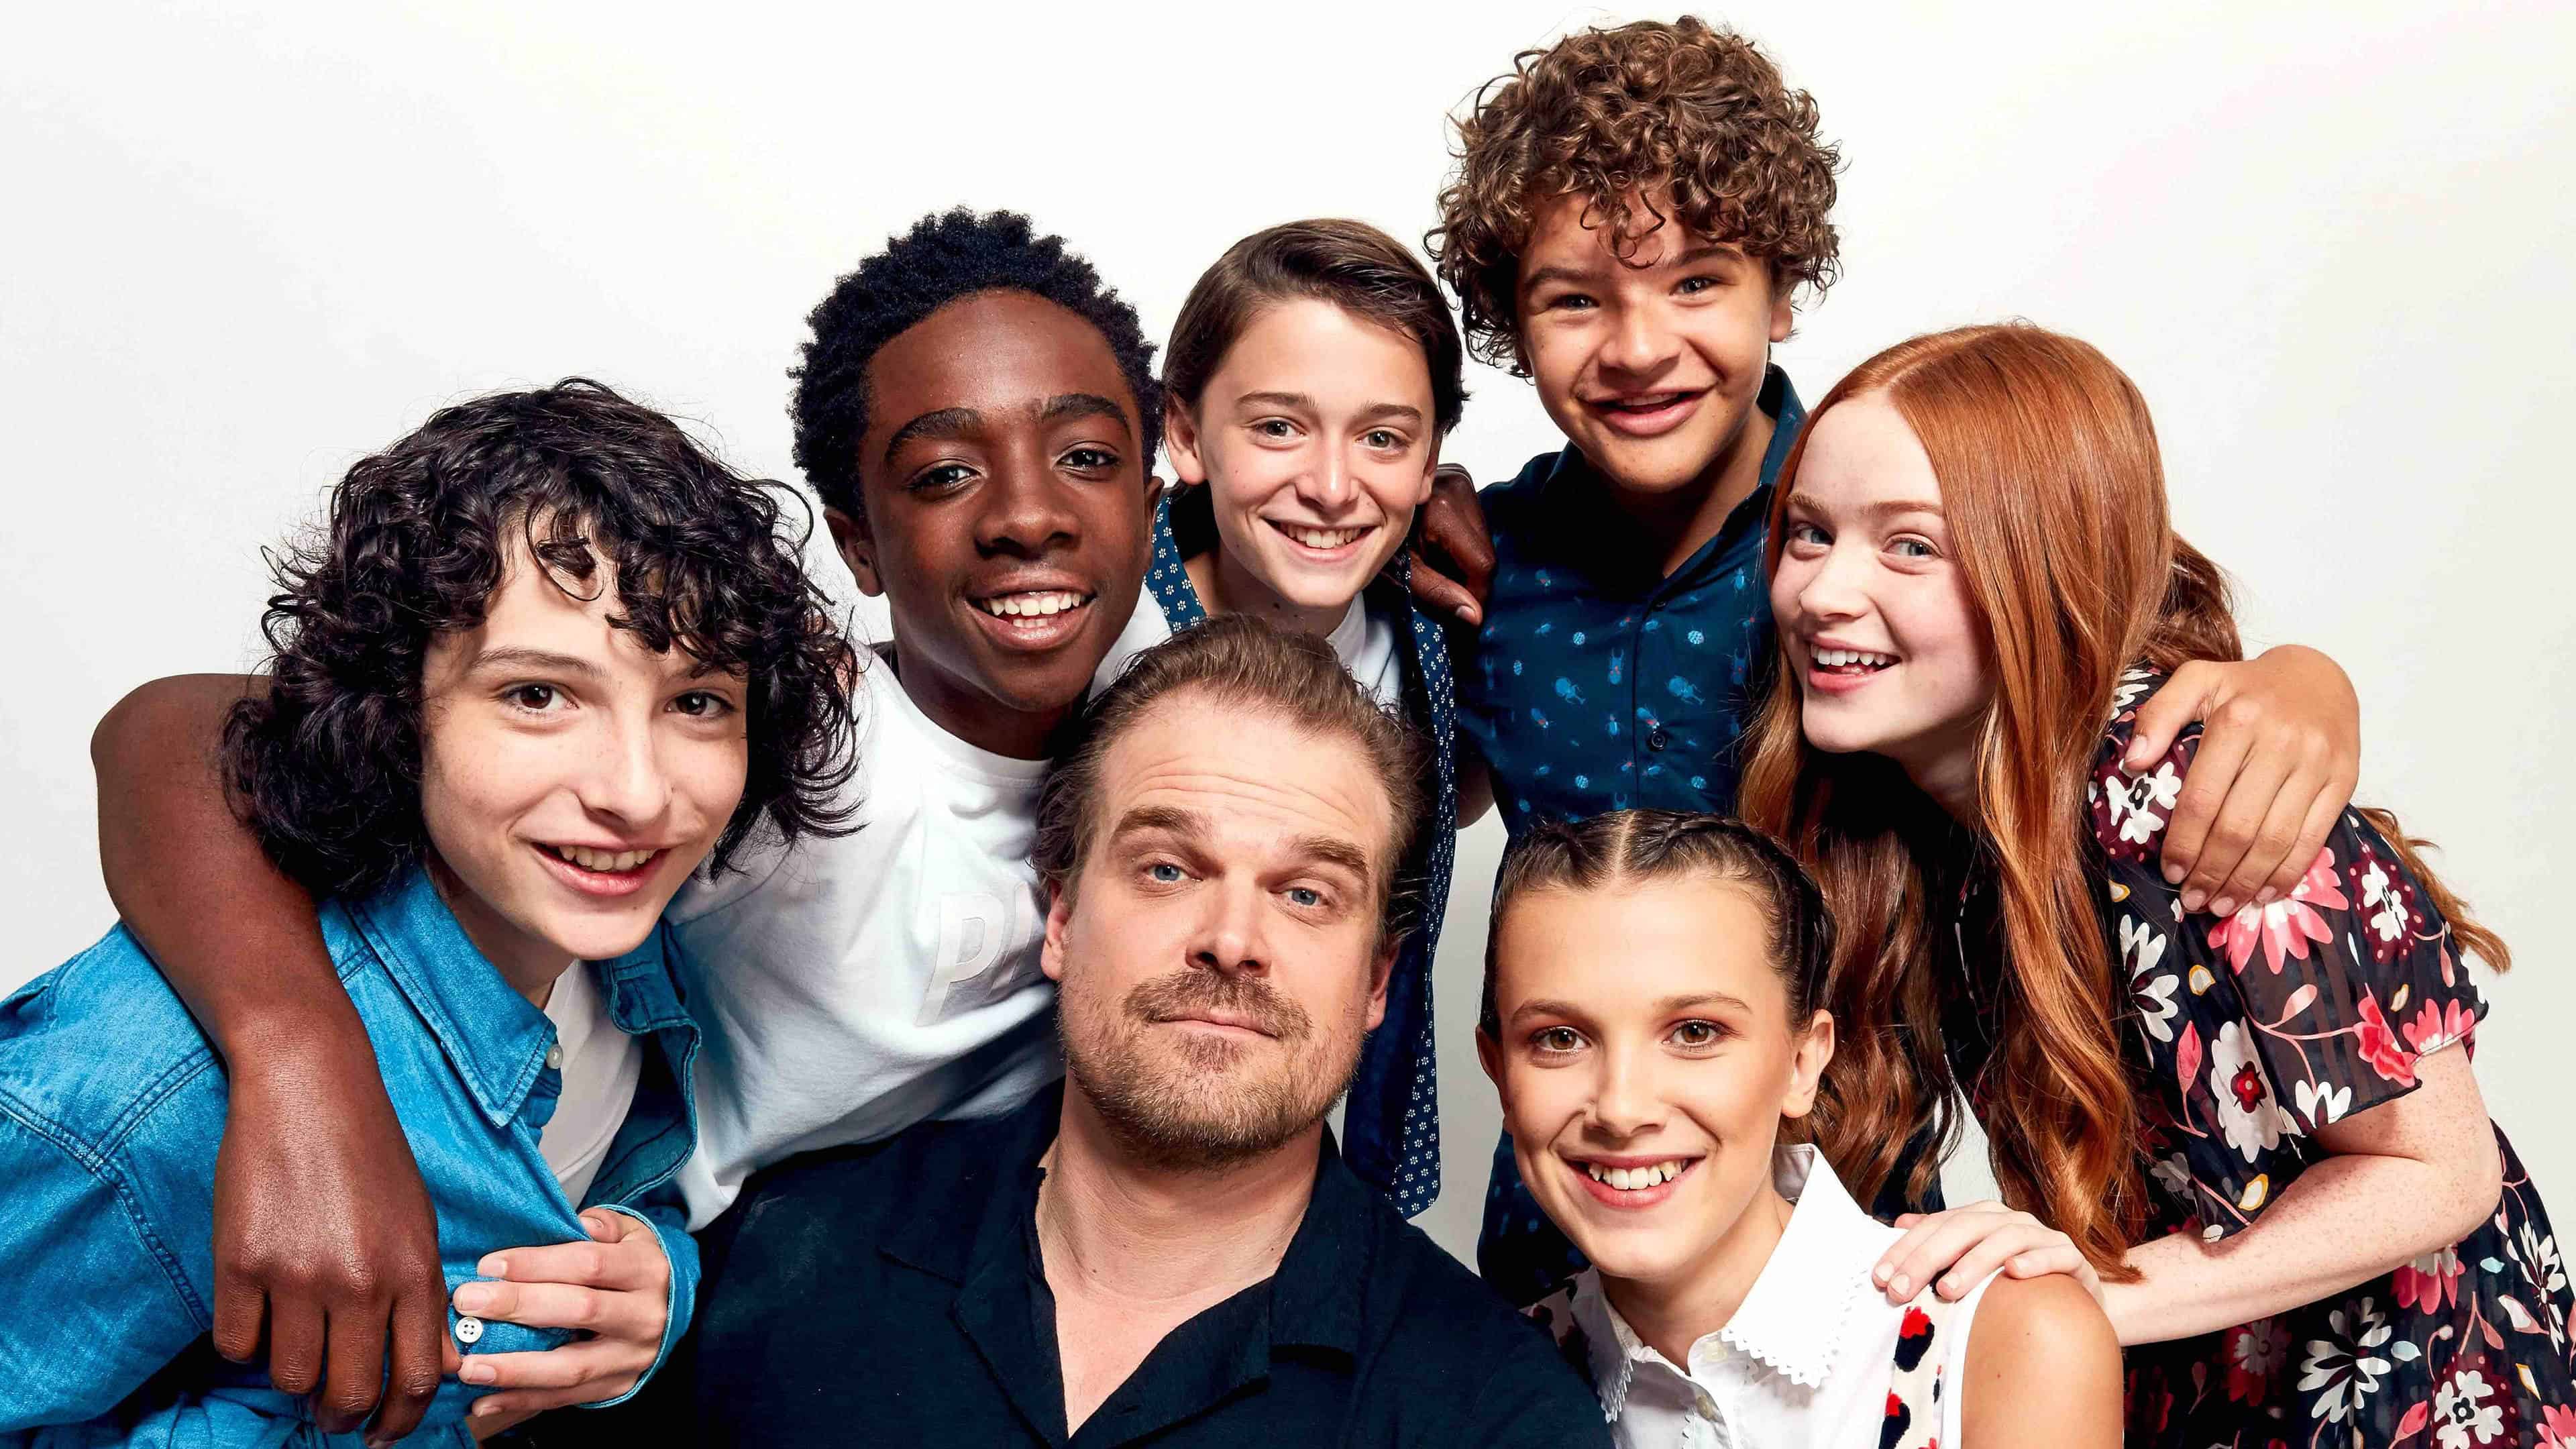 New Wallpapers - Stranger Things 2 Cast , HD Wallpaper & Backgrounds